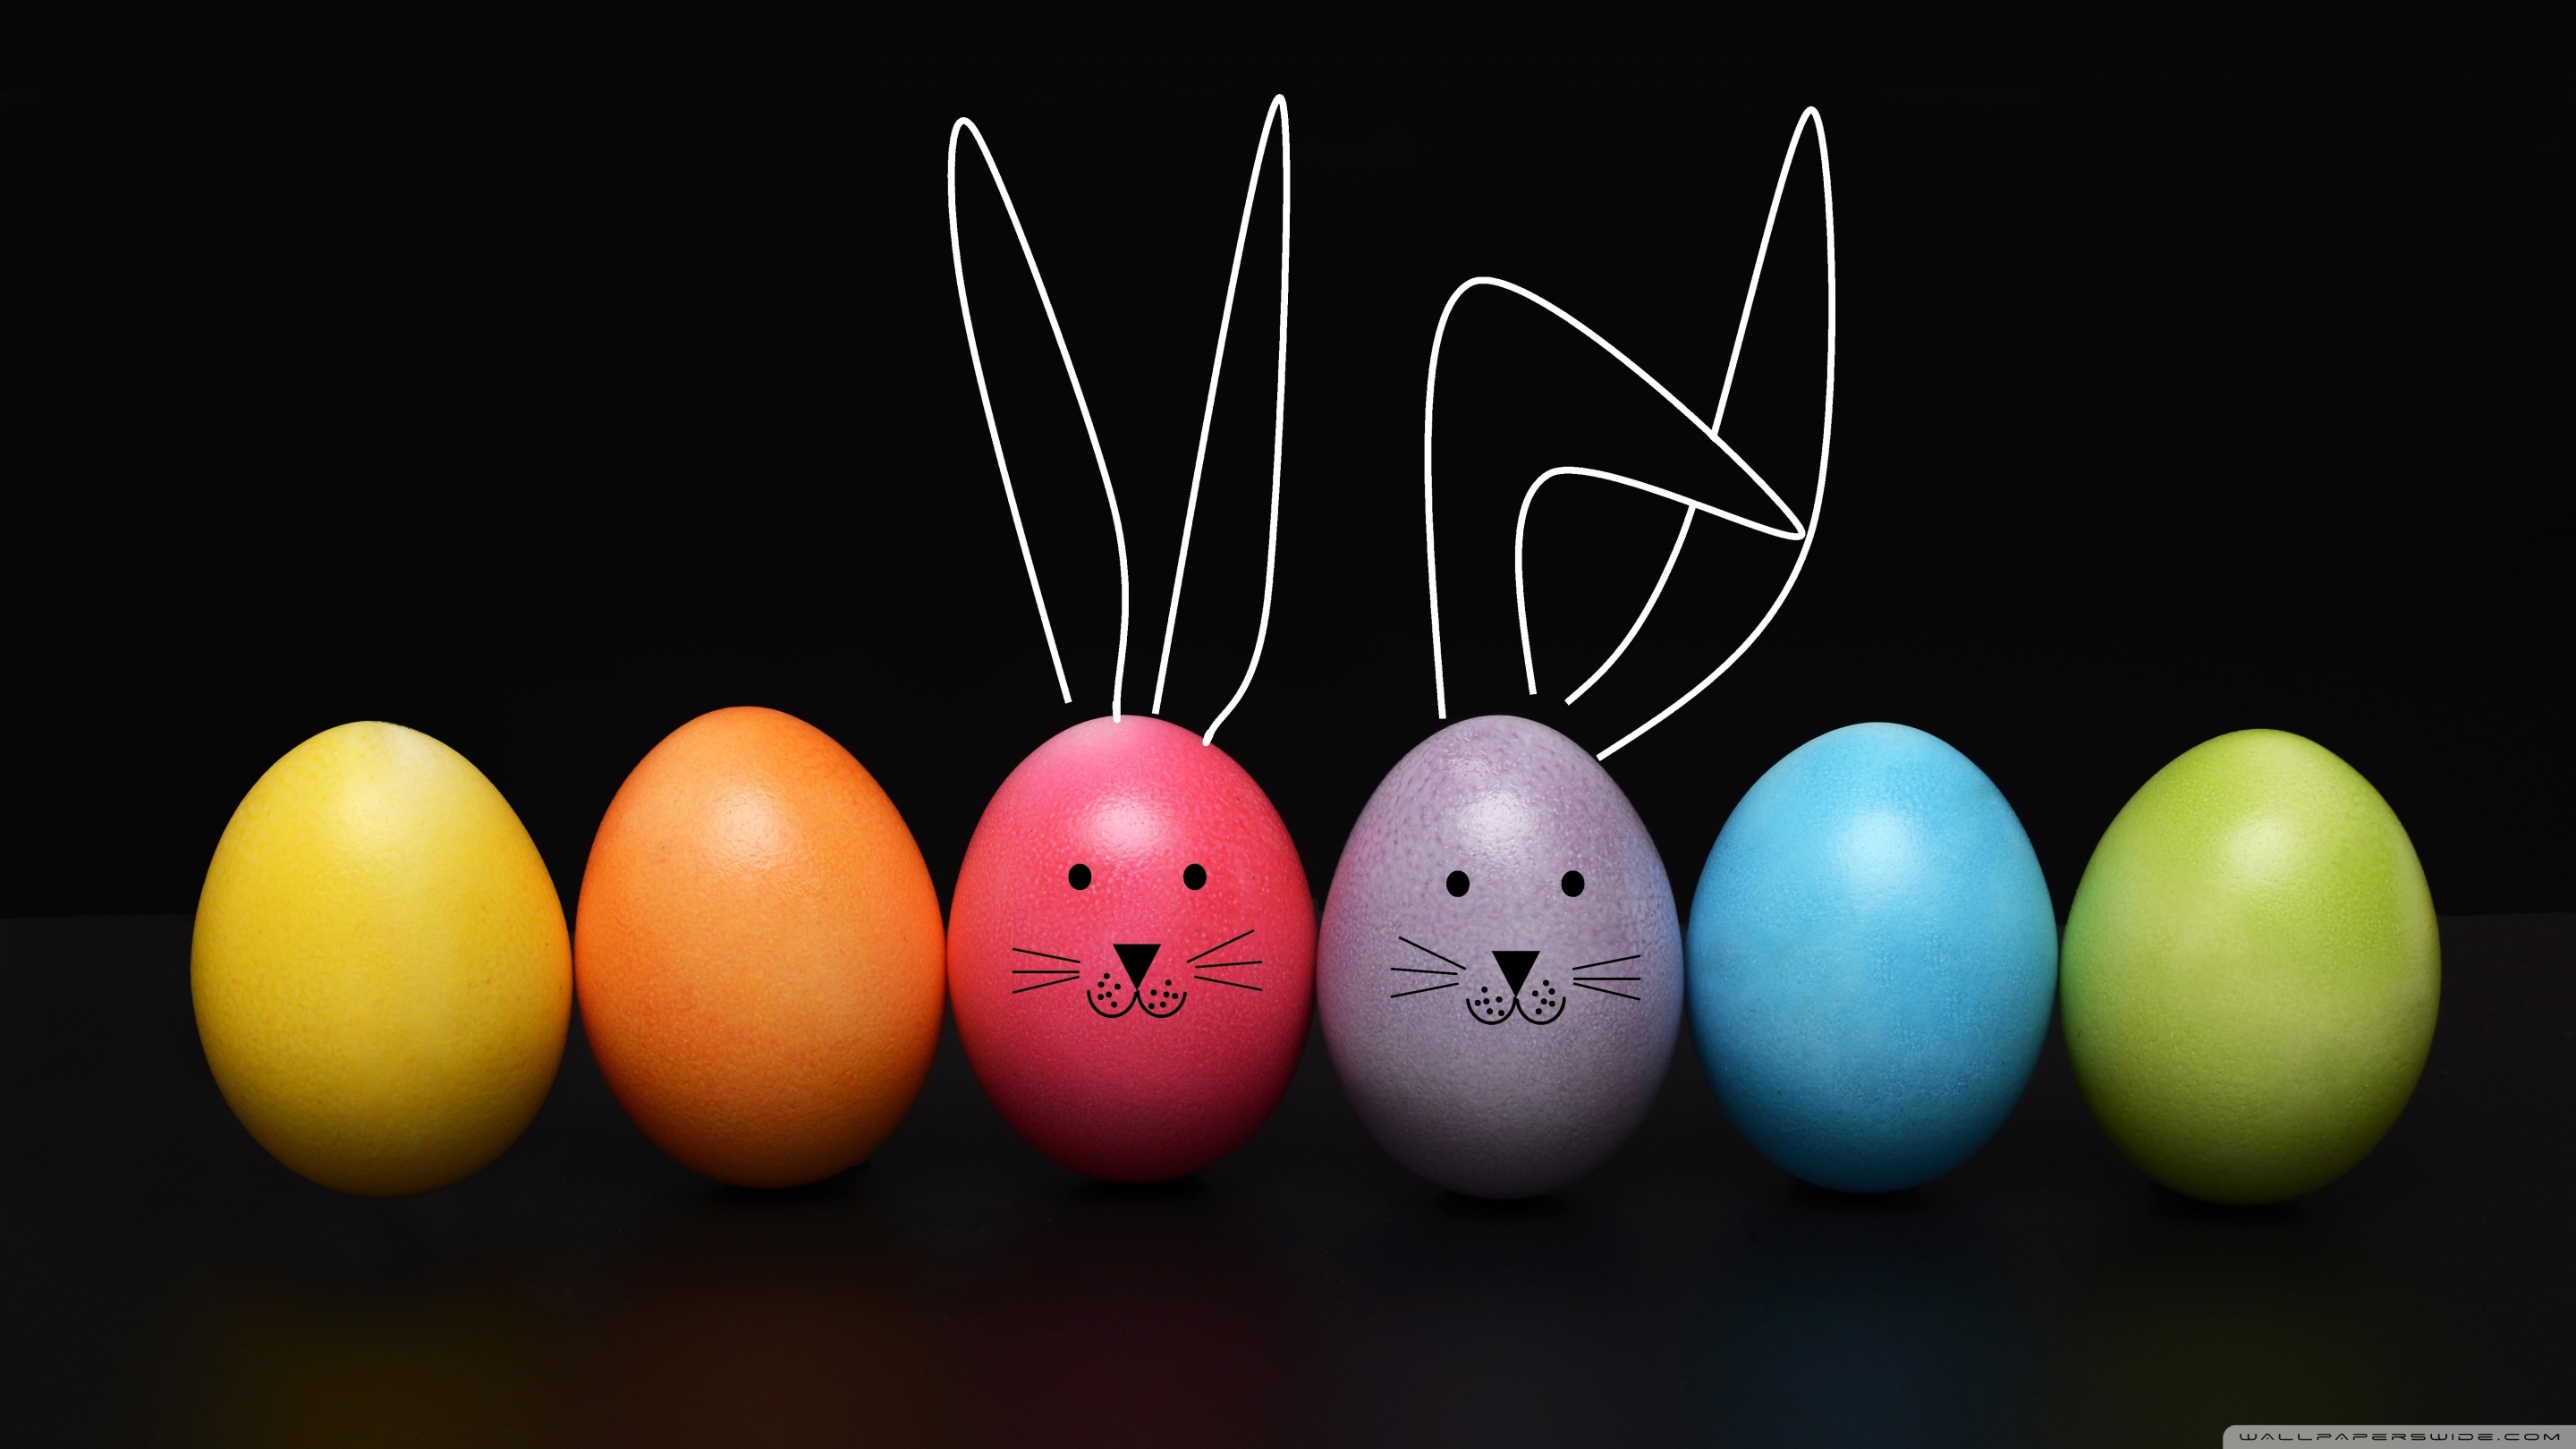 Hd 16 - - Happy Easter Hd Images 2019 , HD Wallpaper & Backgrounds